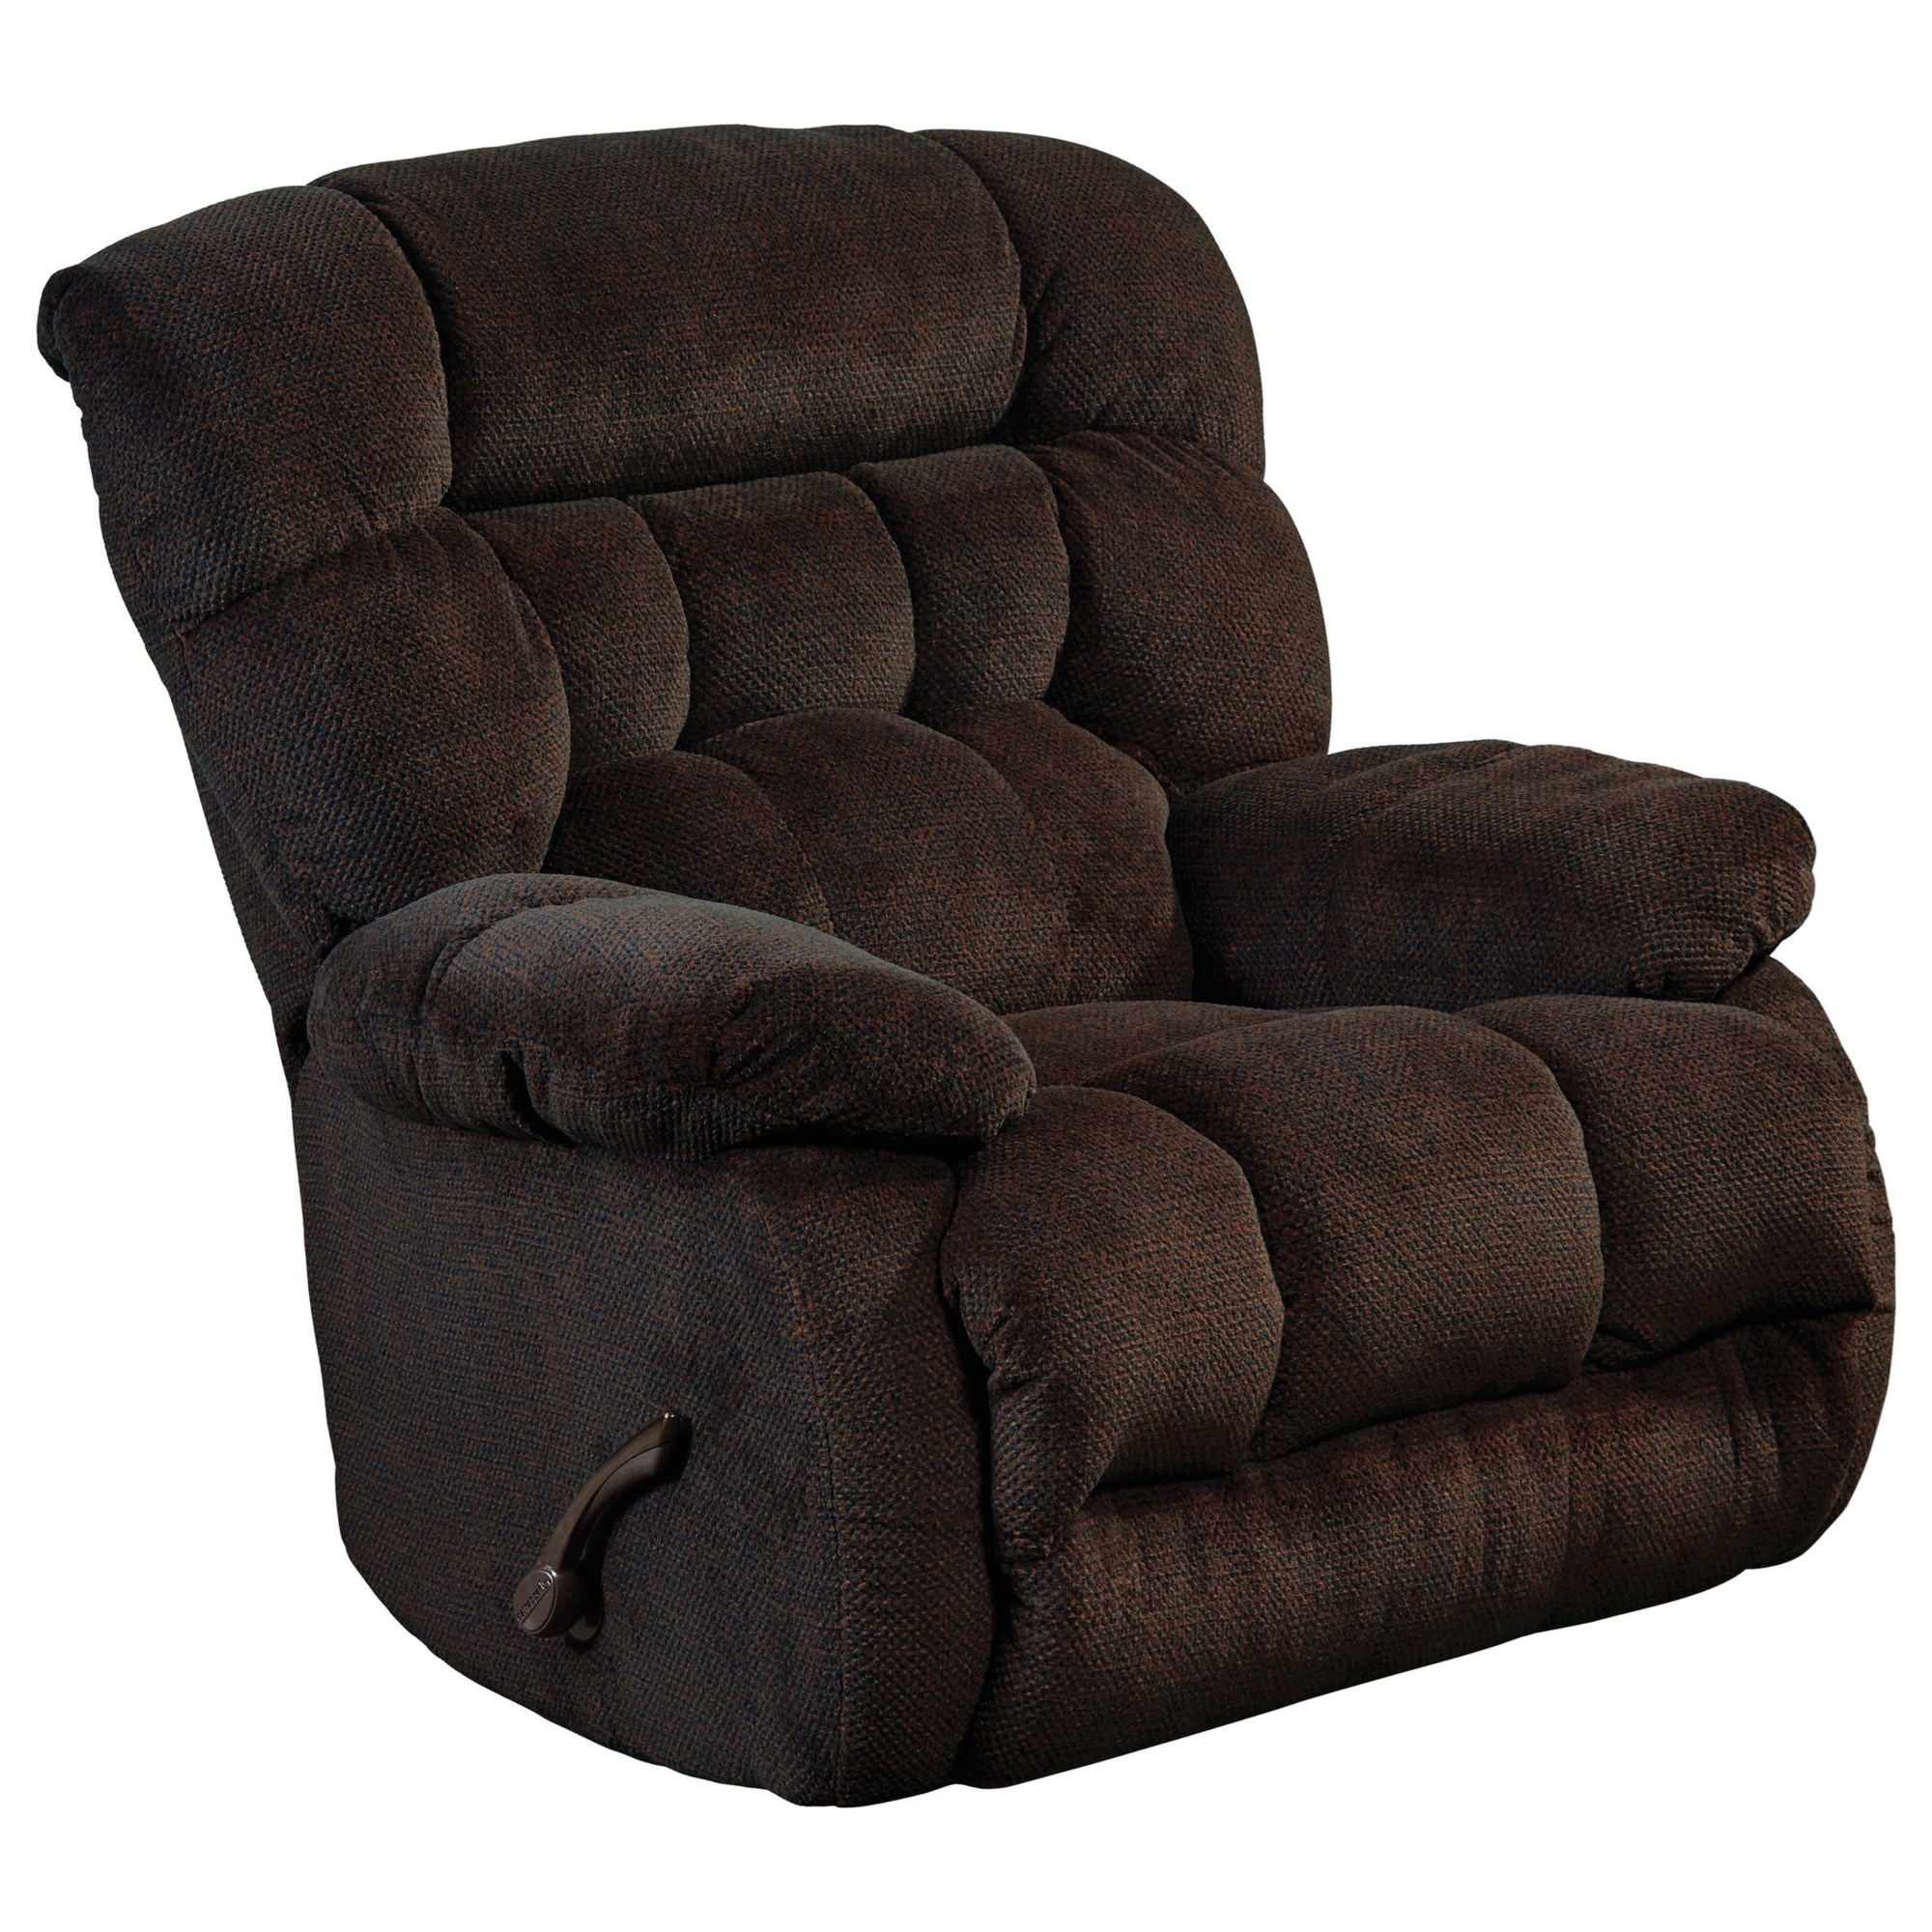 Catnapper Daly Chaise Rocker Recliner Chocolate